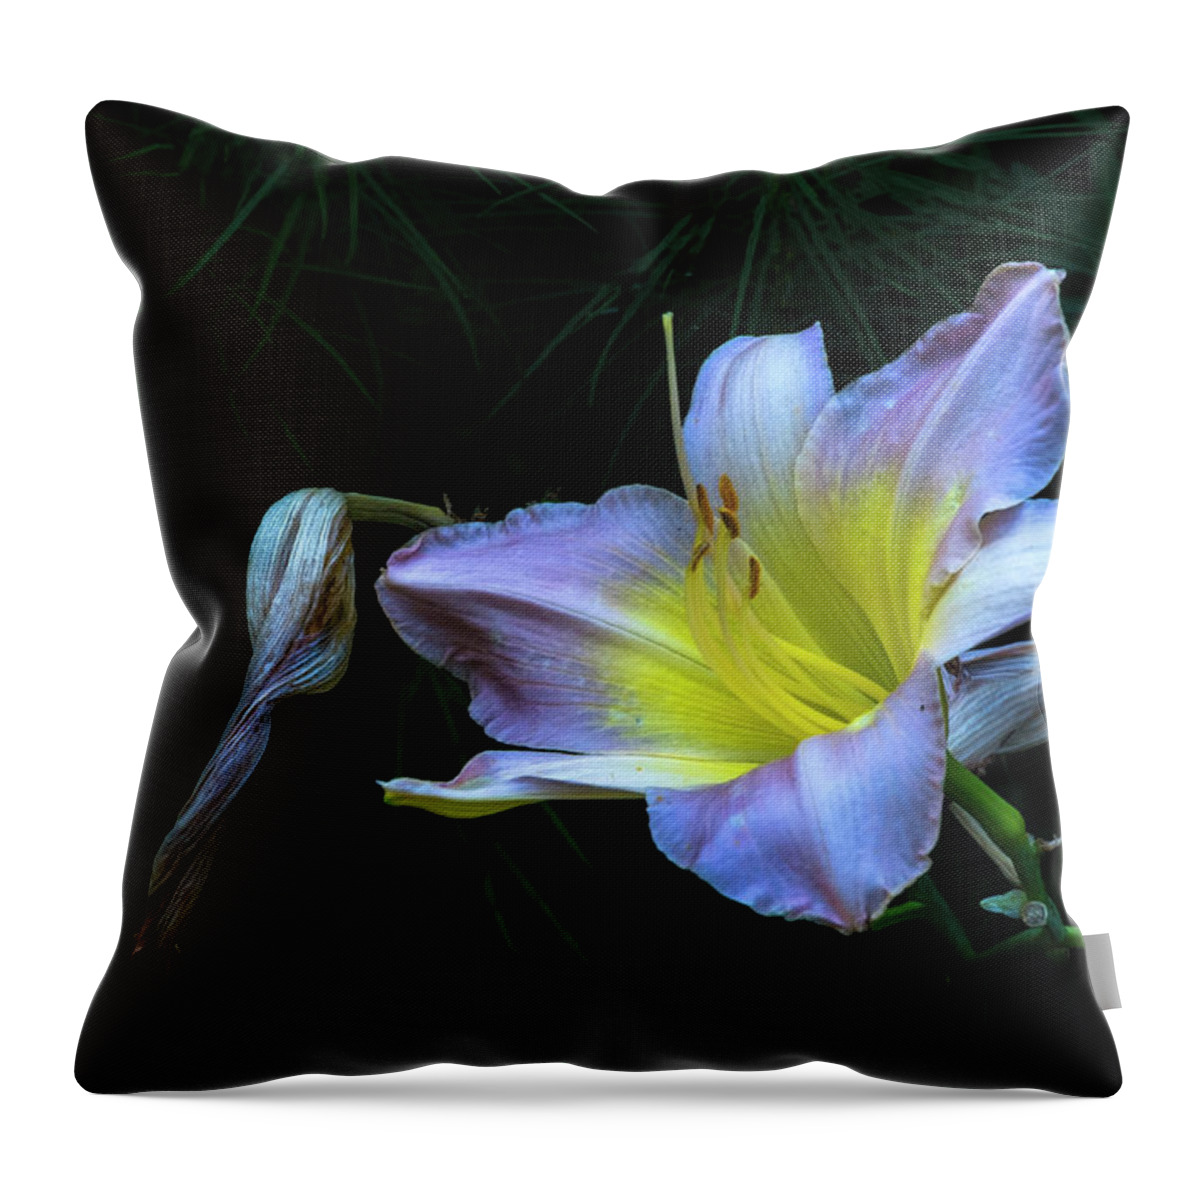 Hayward Garden Putney Vermont Throw Pillow featuring the photograph Awesome Daylily by Tom Singleton